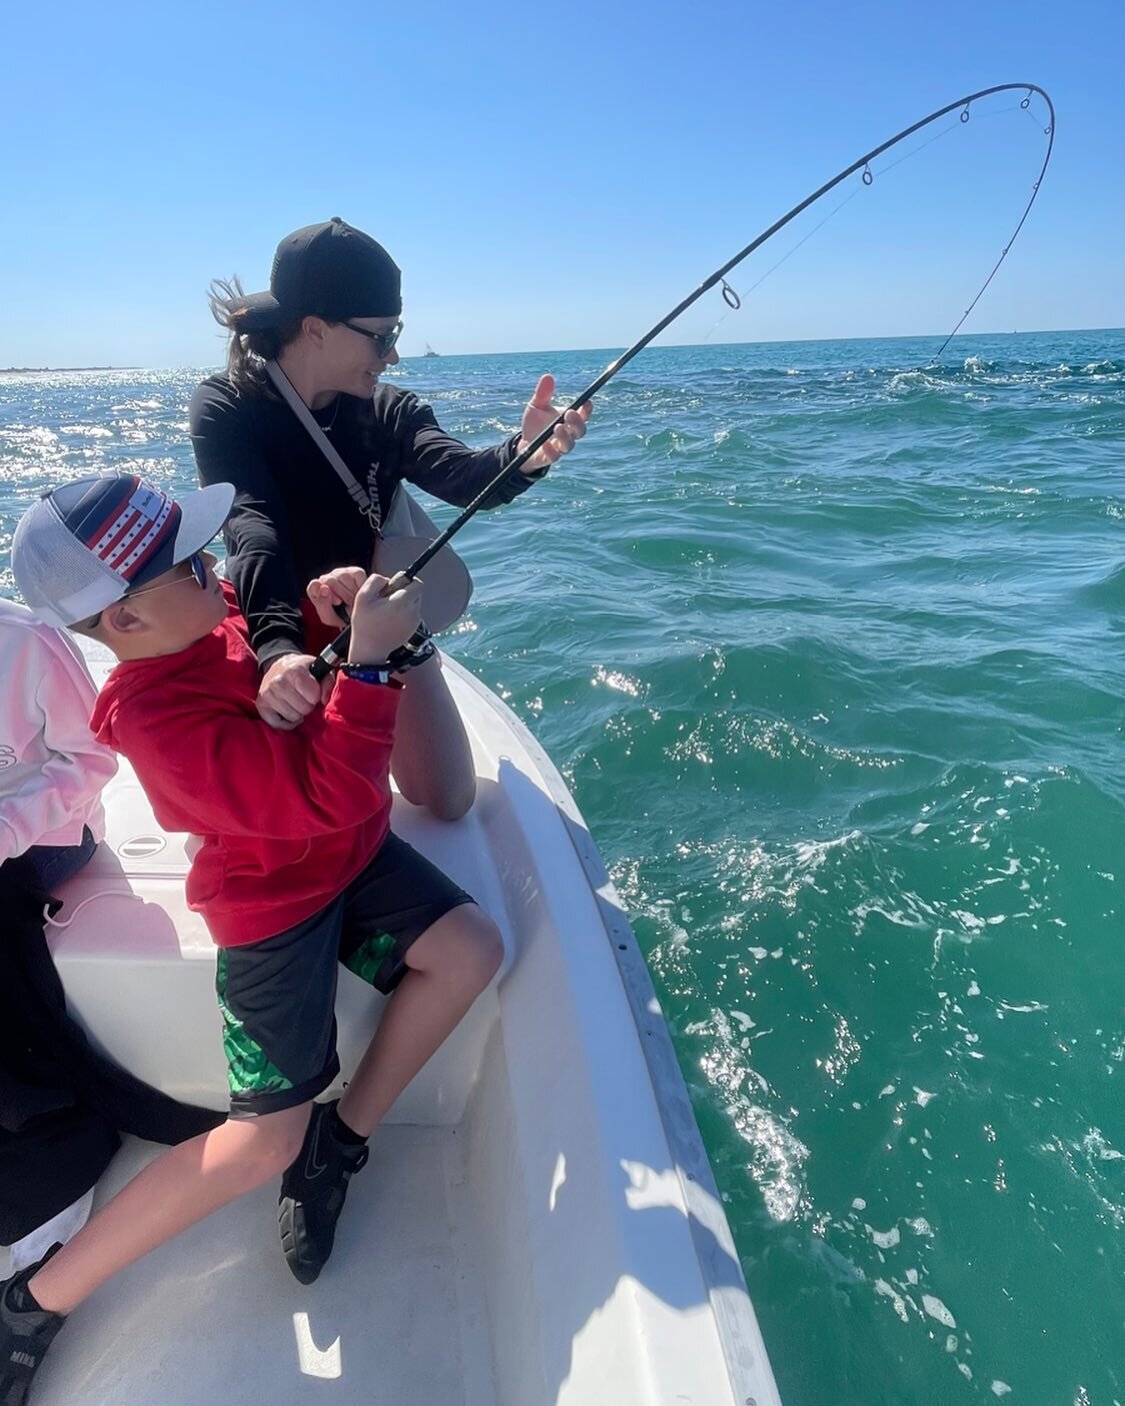 Sometimes we just need a little extra help!!&thinsp;
&thinsp;&thinsp;
Call and book your fishing trip now!!&thinsp;&thinsp;
(𝟖𝟓𝟎)𝟖𝟗𝟔-𝟒𝟕𝟏𝟐&thinsp;&thinsp;
&thinsp;&thinsp;
#reelrosie&thinsp;&thinsp;
&thinsp;&thinsp;
#fishpcb #visitpcb #grand